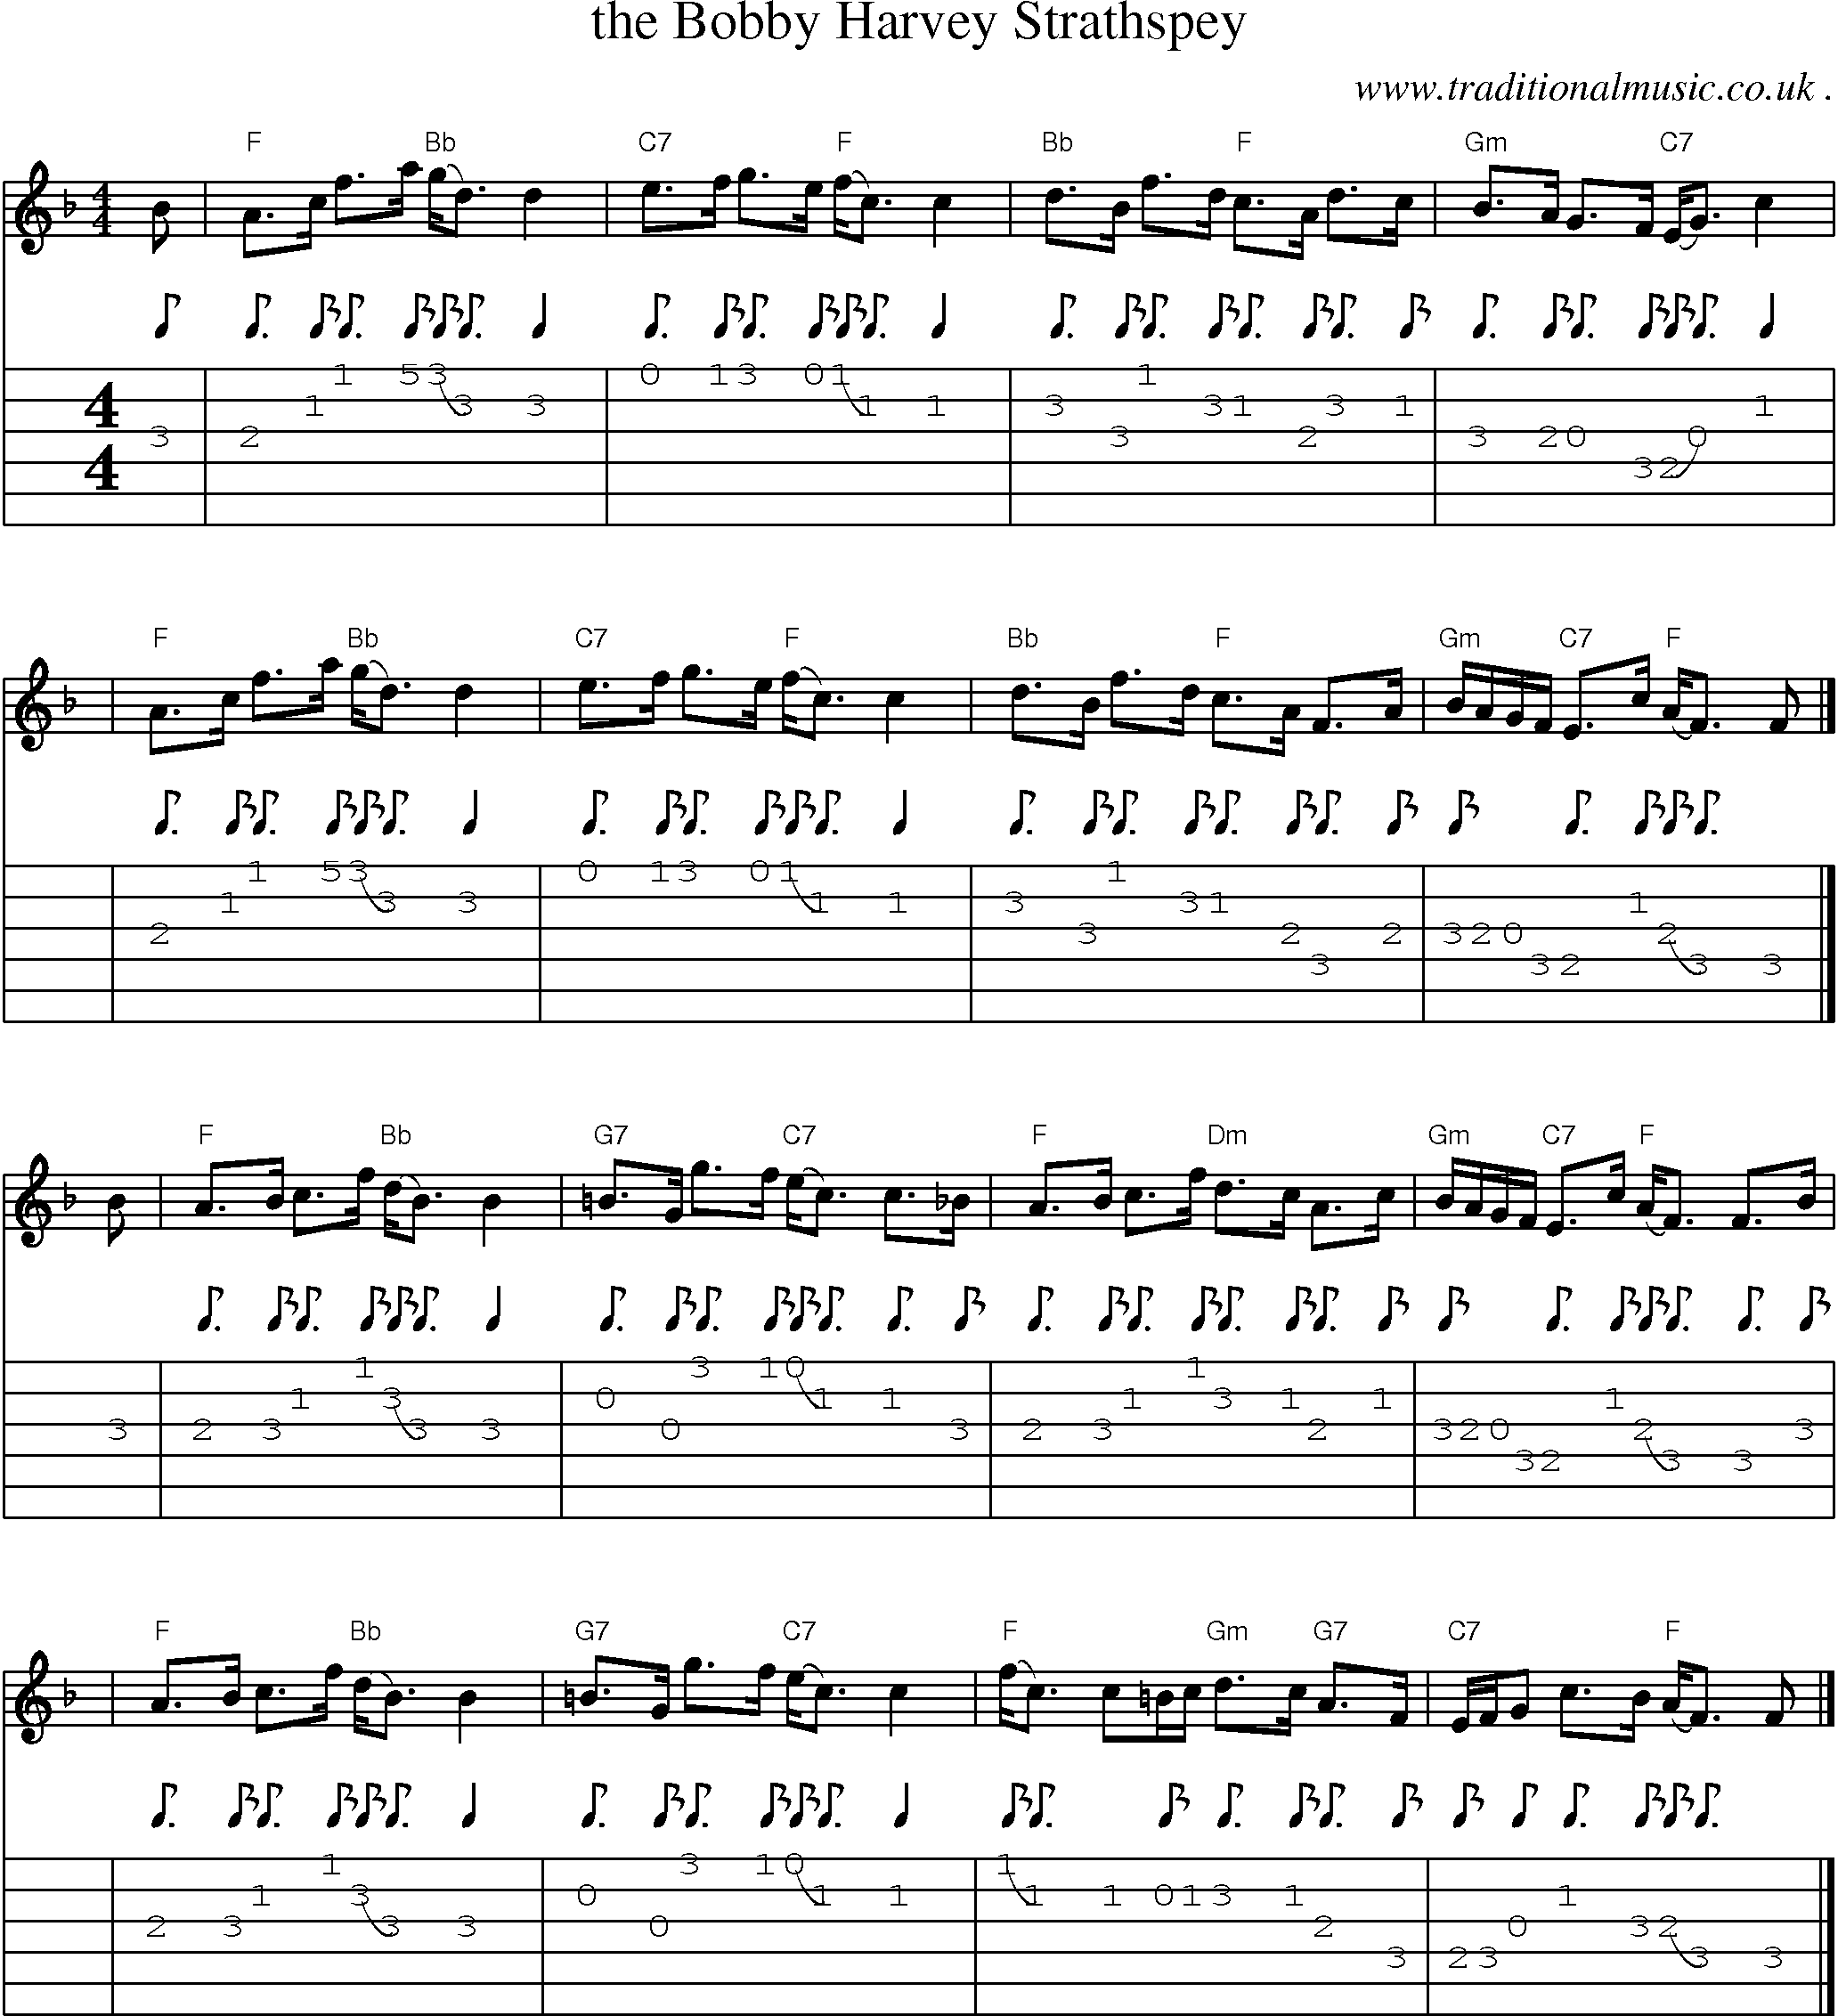 Sheet-music  score, Chords and Guitar Tabs for The Bobby Harvey Strathspey